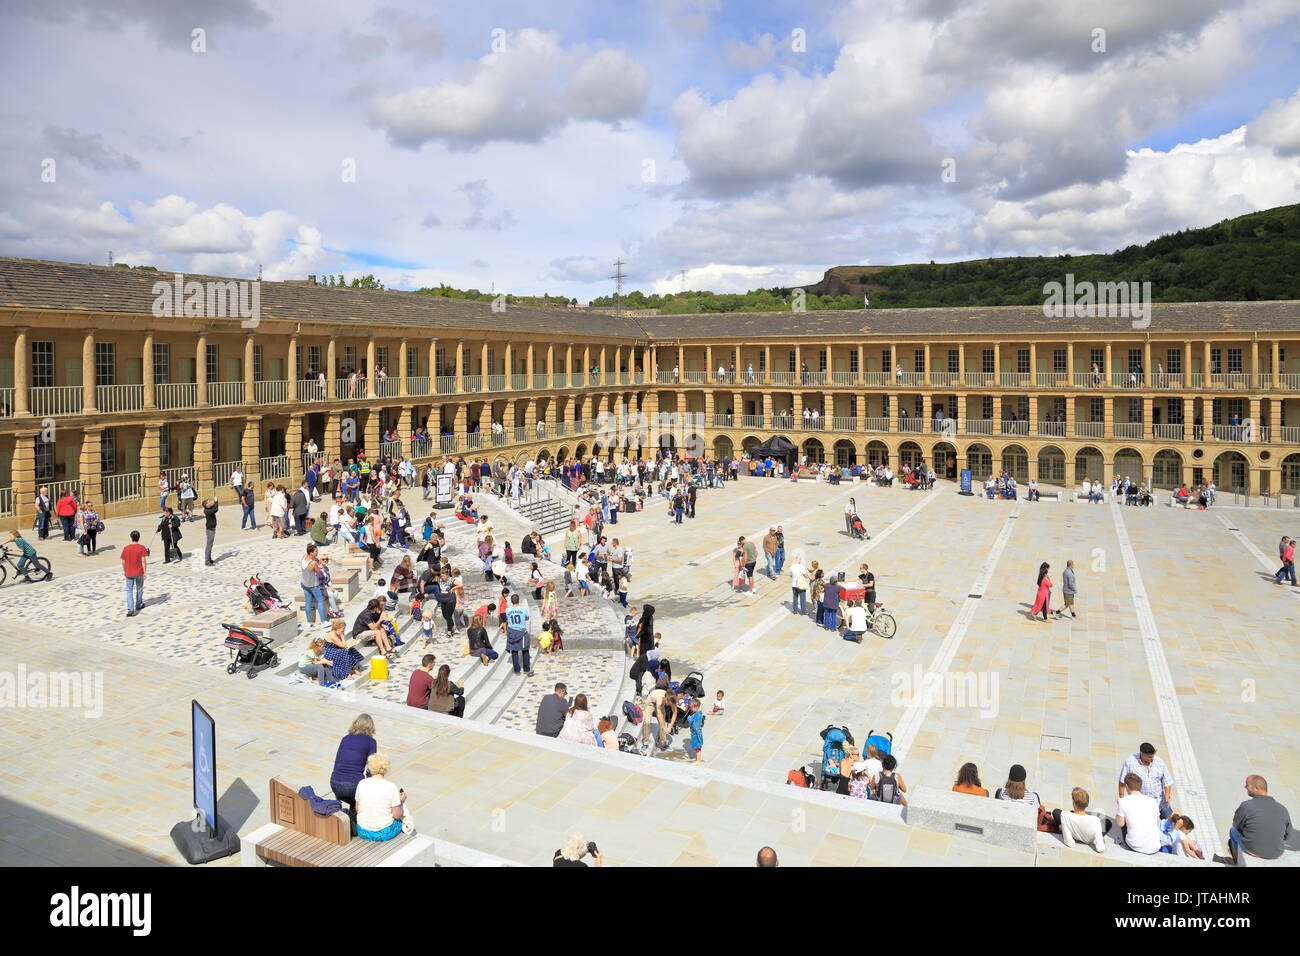 The recently opened Piece Hall after a £19 million conservation and transformation programme, Halifax, West Yorkshire, England, UK. Stock Photo